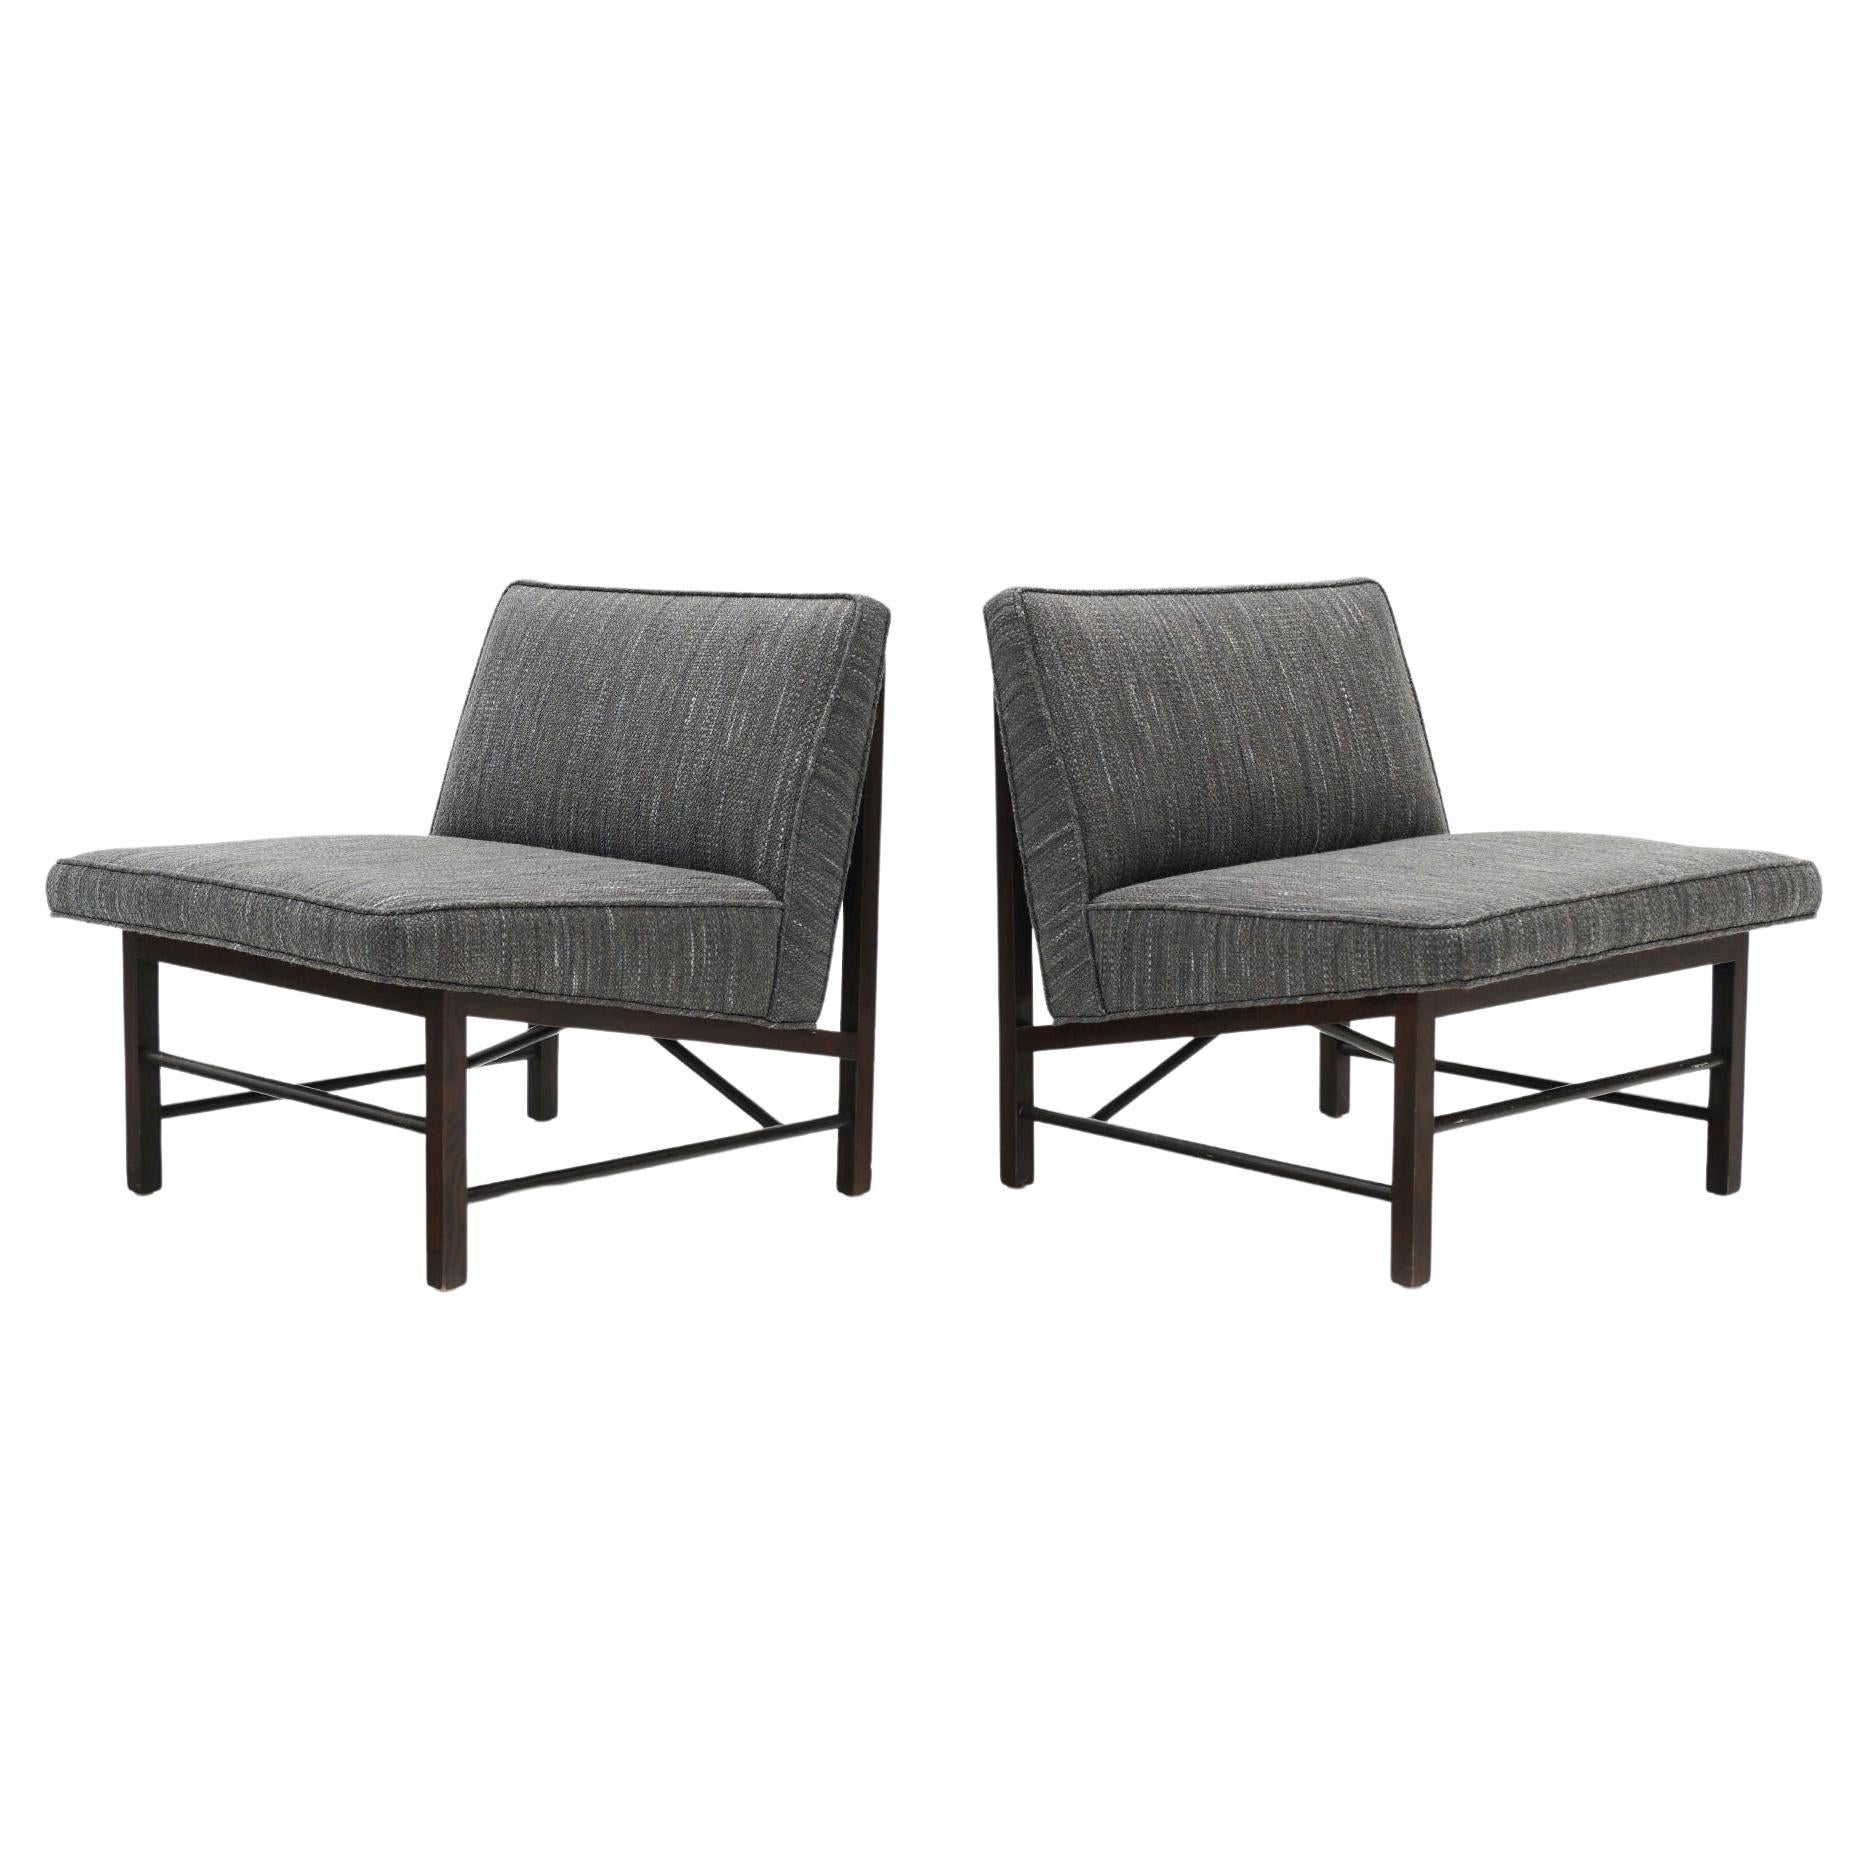 Pair Slipper Chairs by Edward Wormley for Dunbar, New Charcoal Gray Upholstery